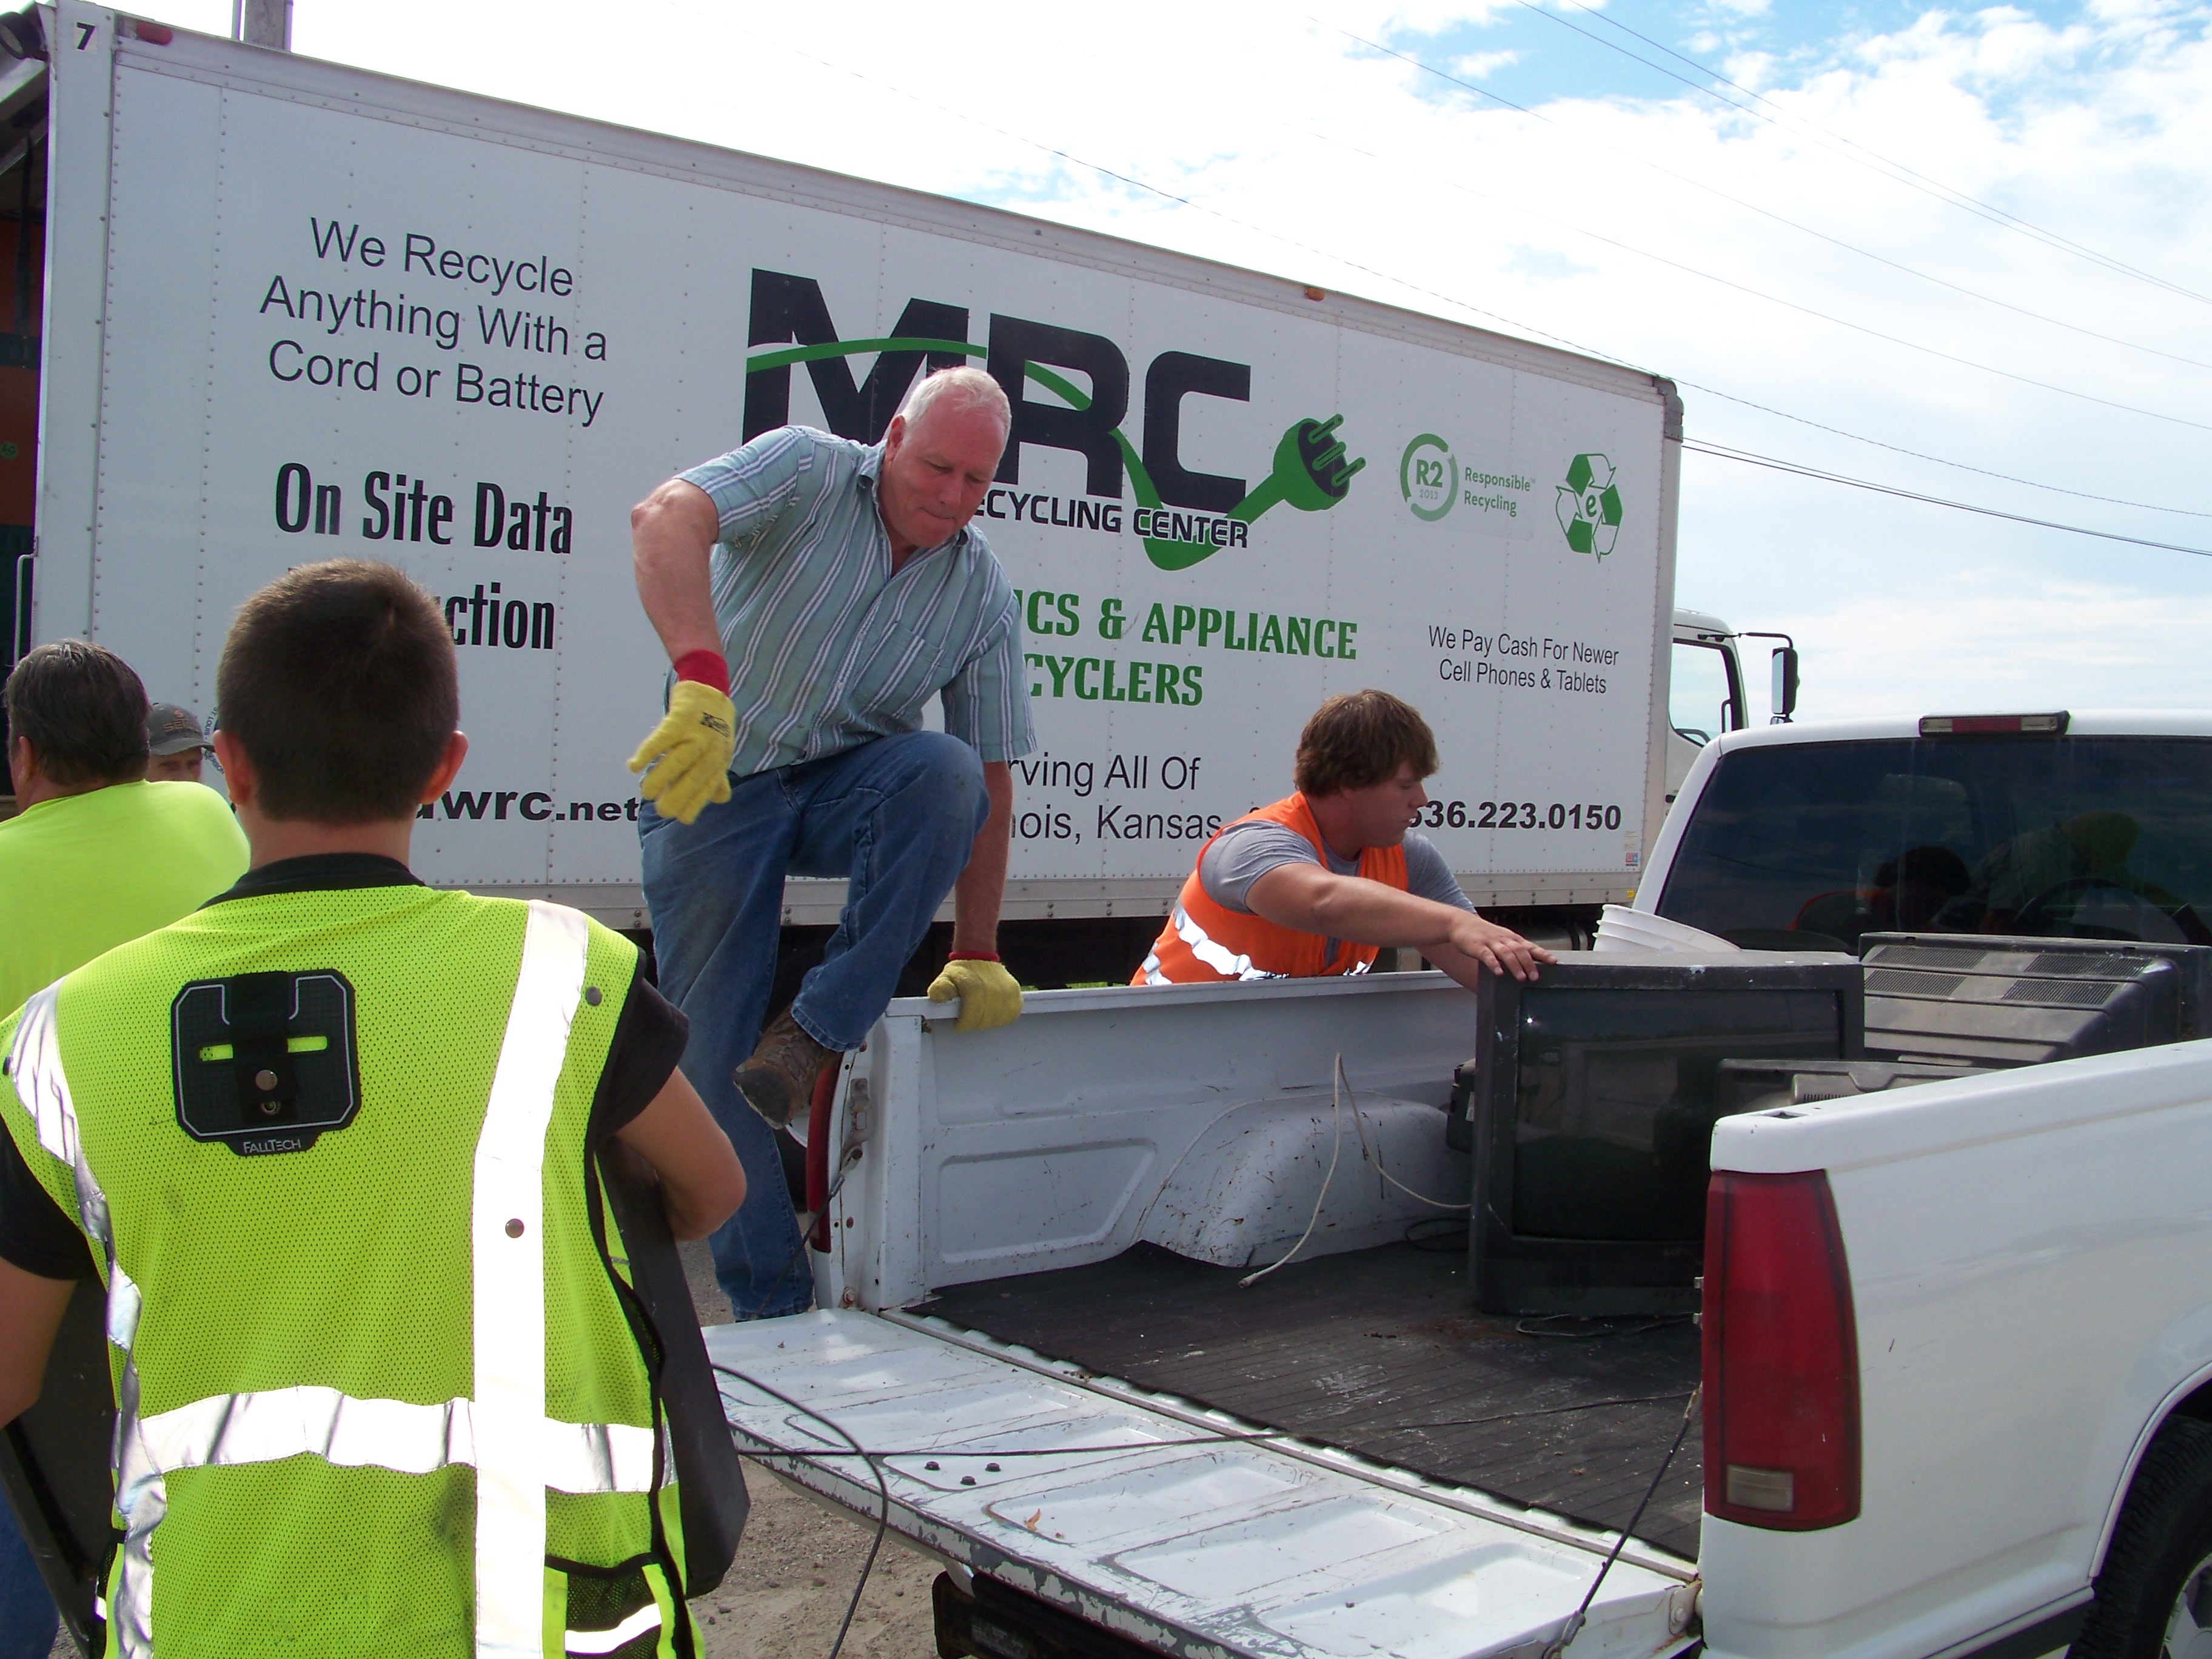 loading items into a truck - Ozark Rivers Solid Waste Management District